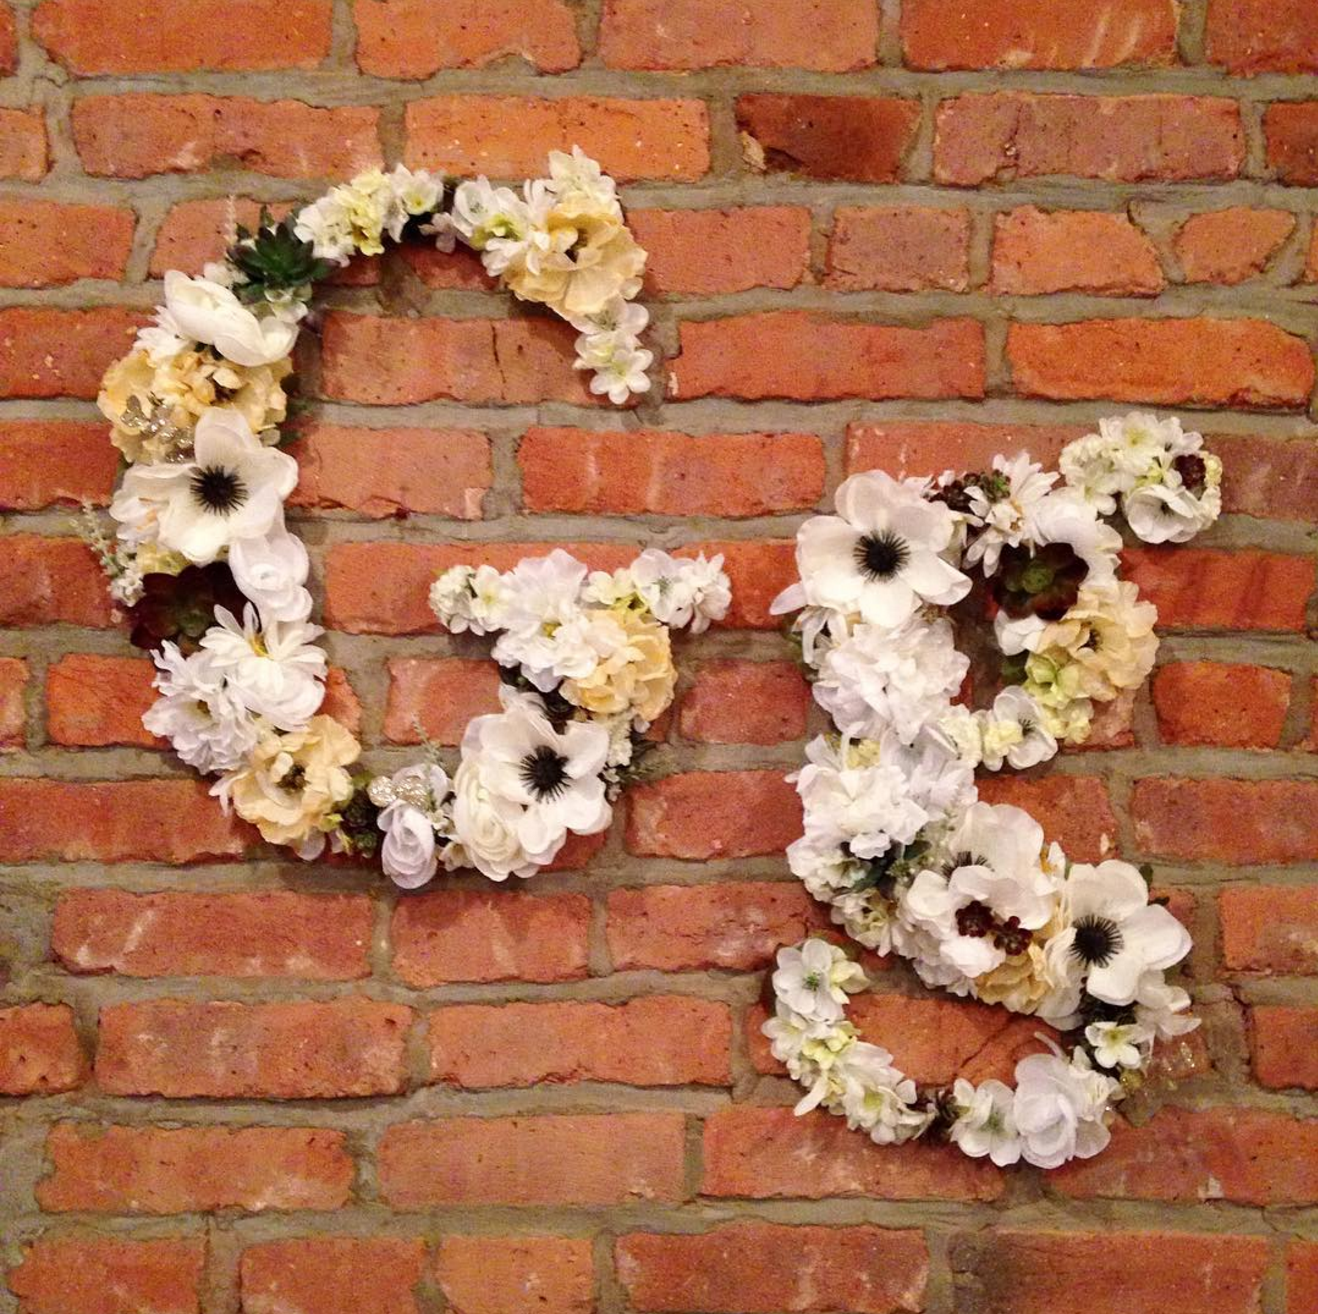 Faux flower typography wall hangings.